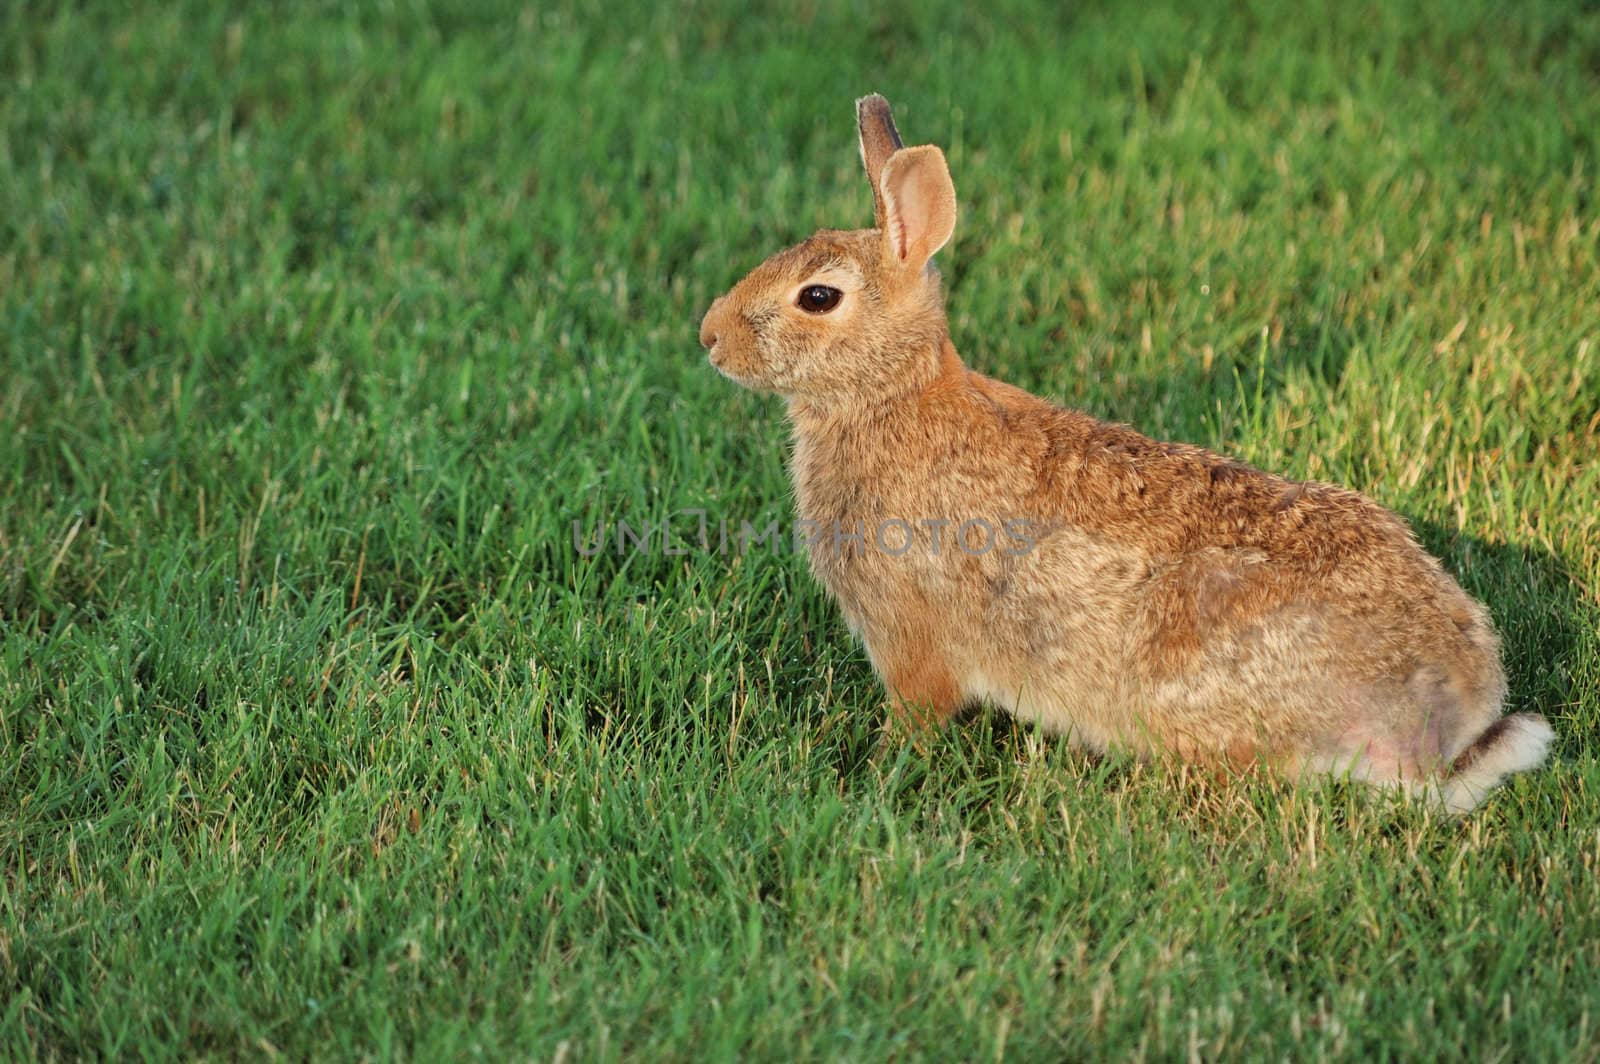 Cottontail rabbit sitting on the grass.